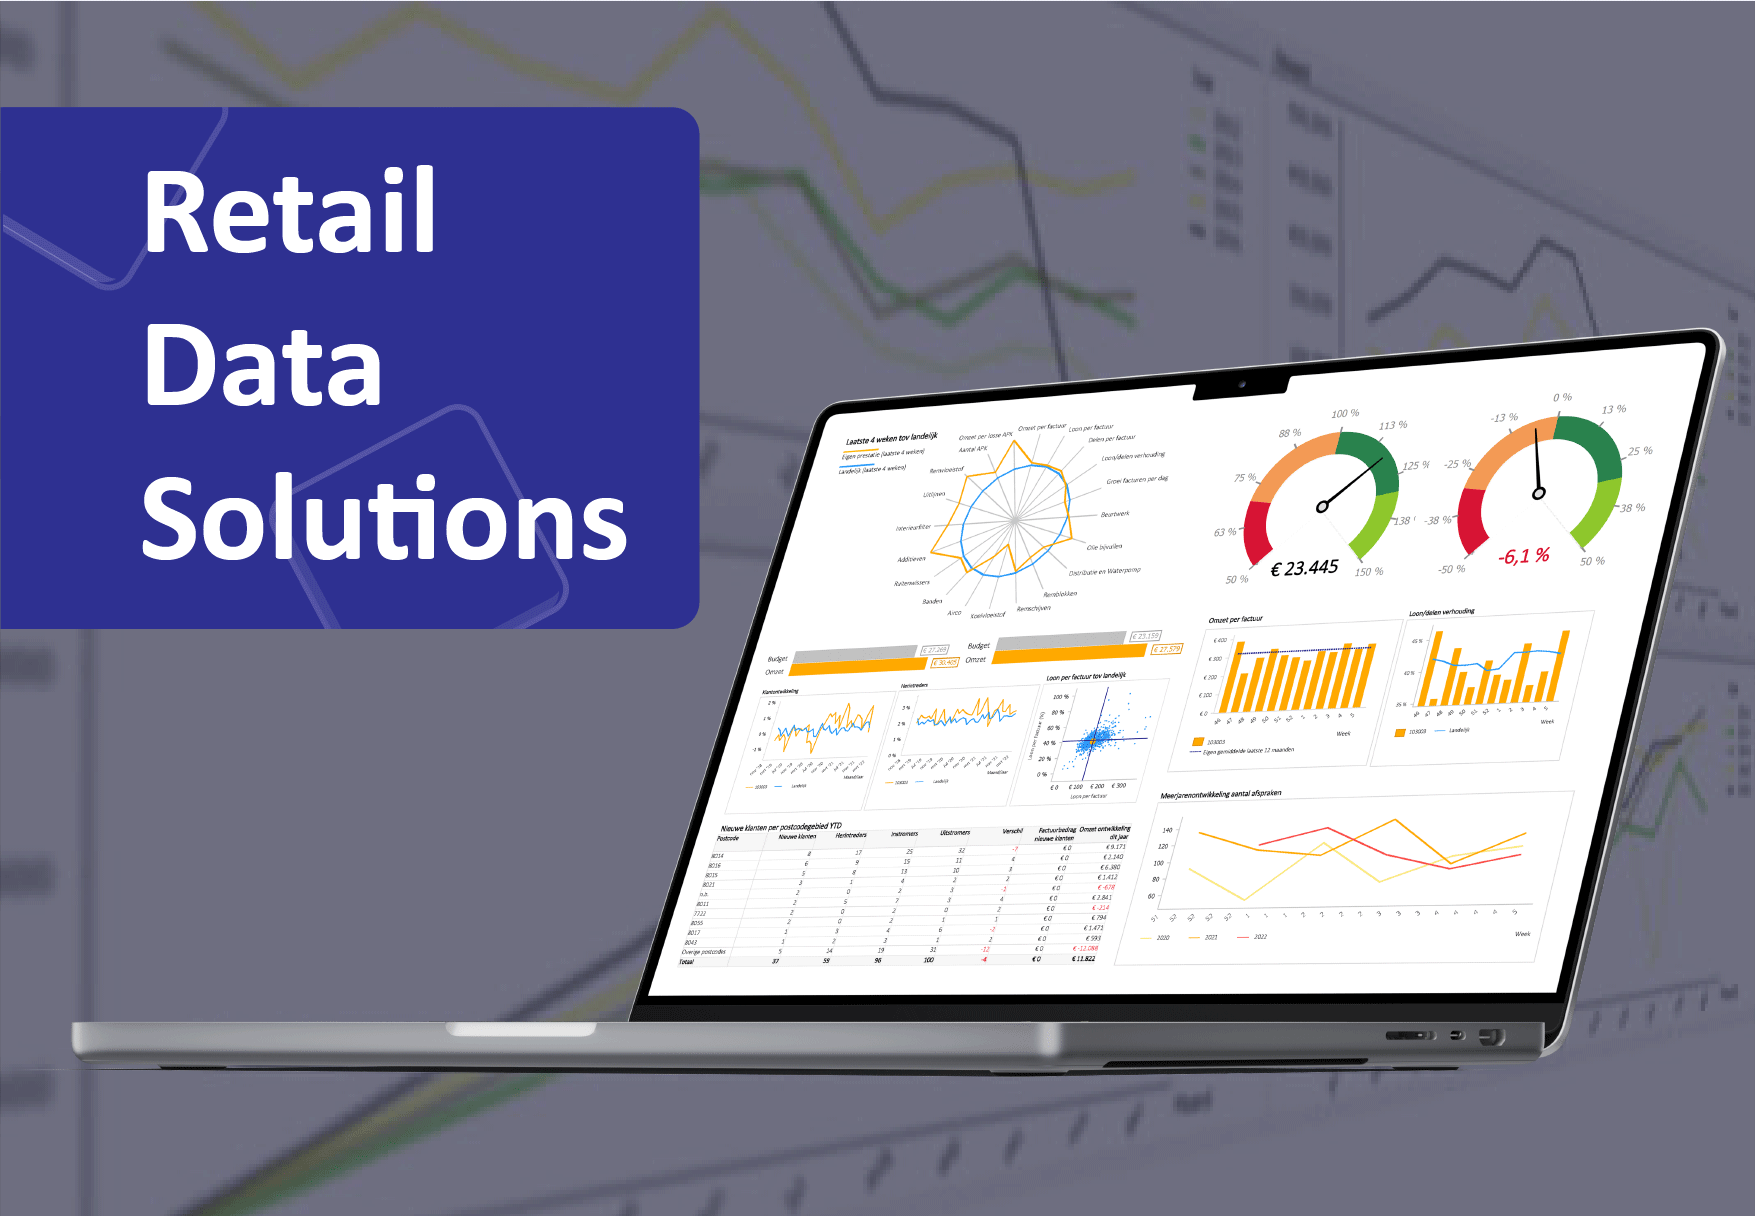 Retail data solutions